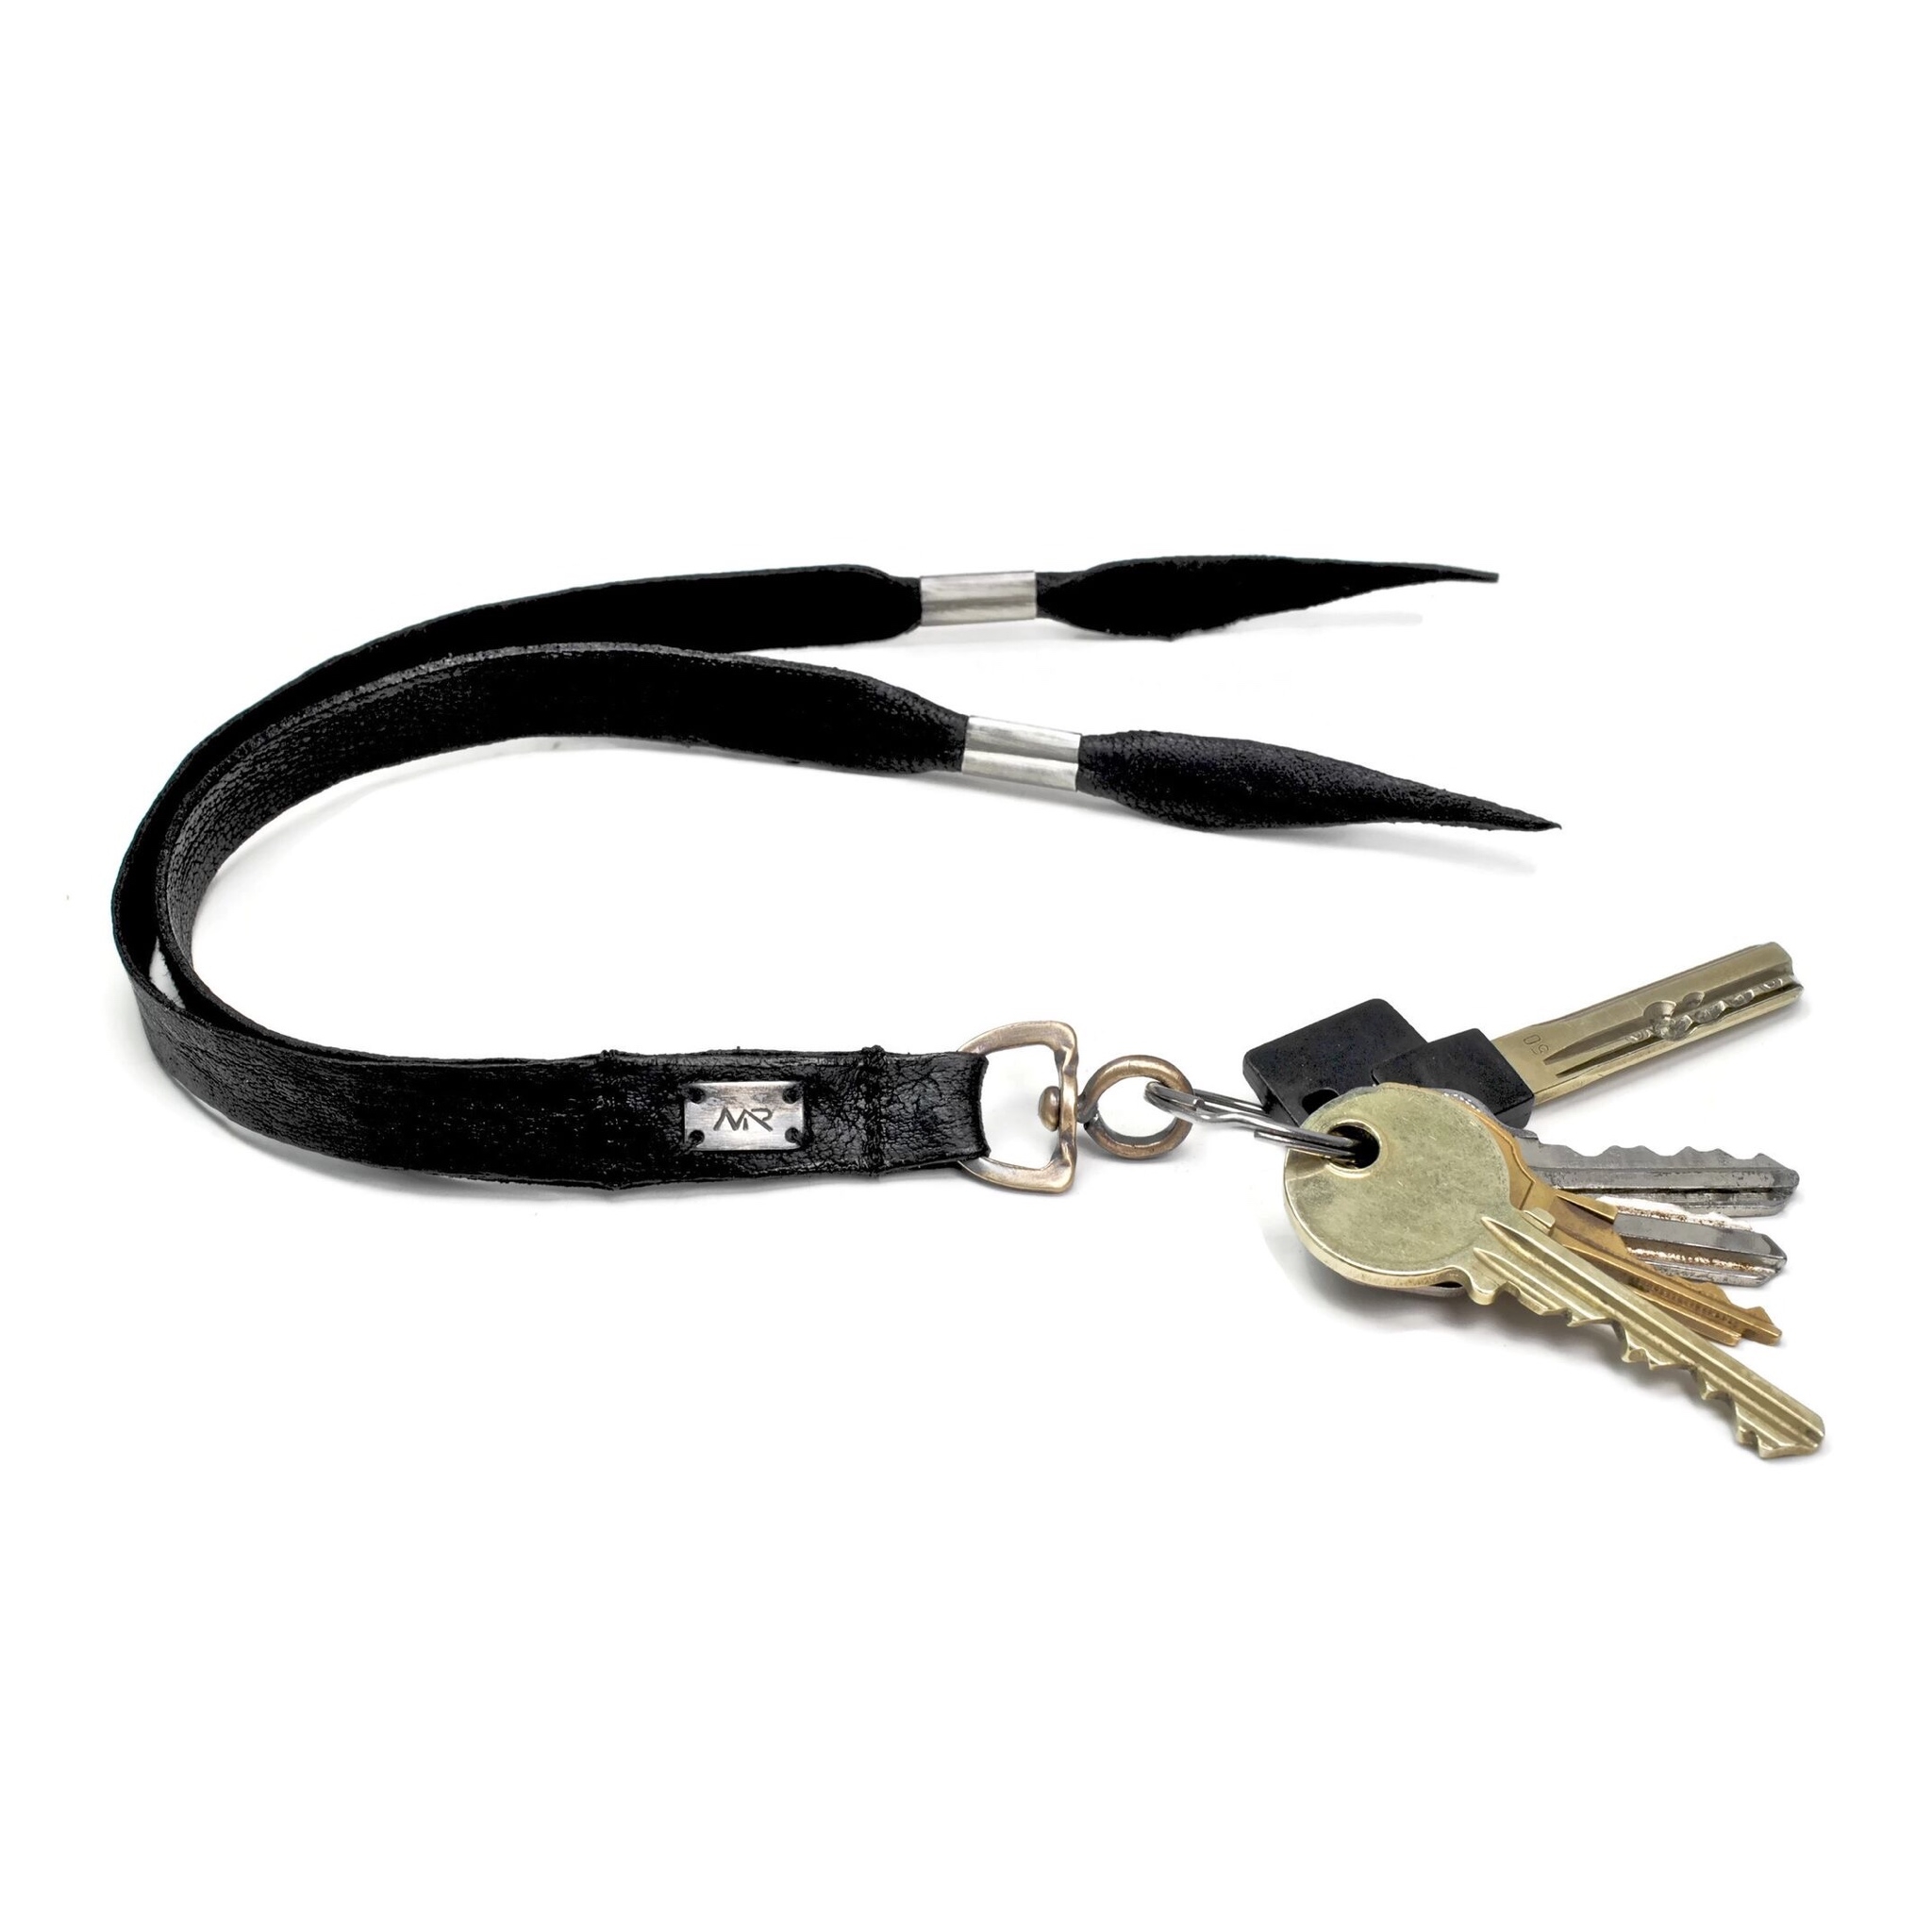 Leather_Strap_Key_Chain_2_preview.JPG